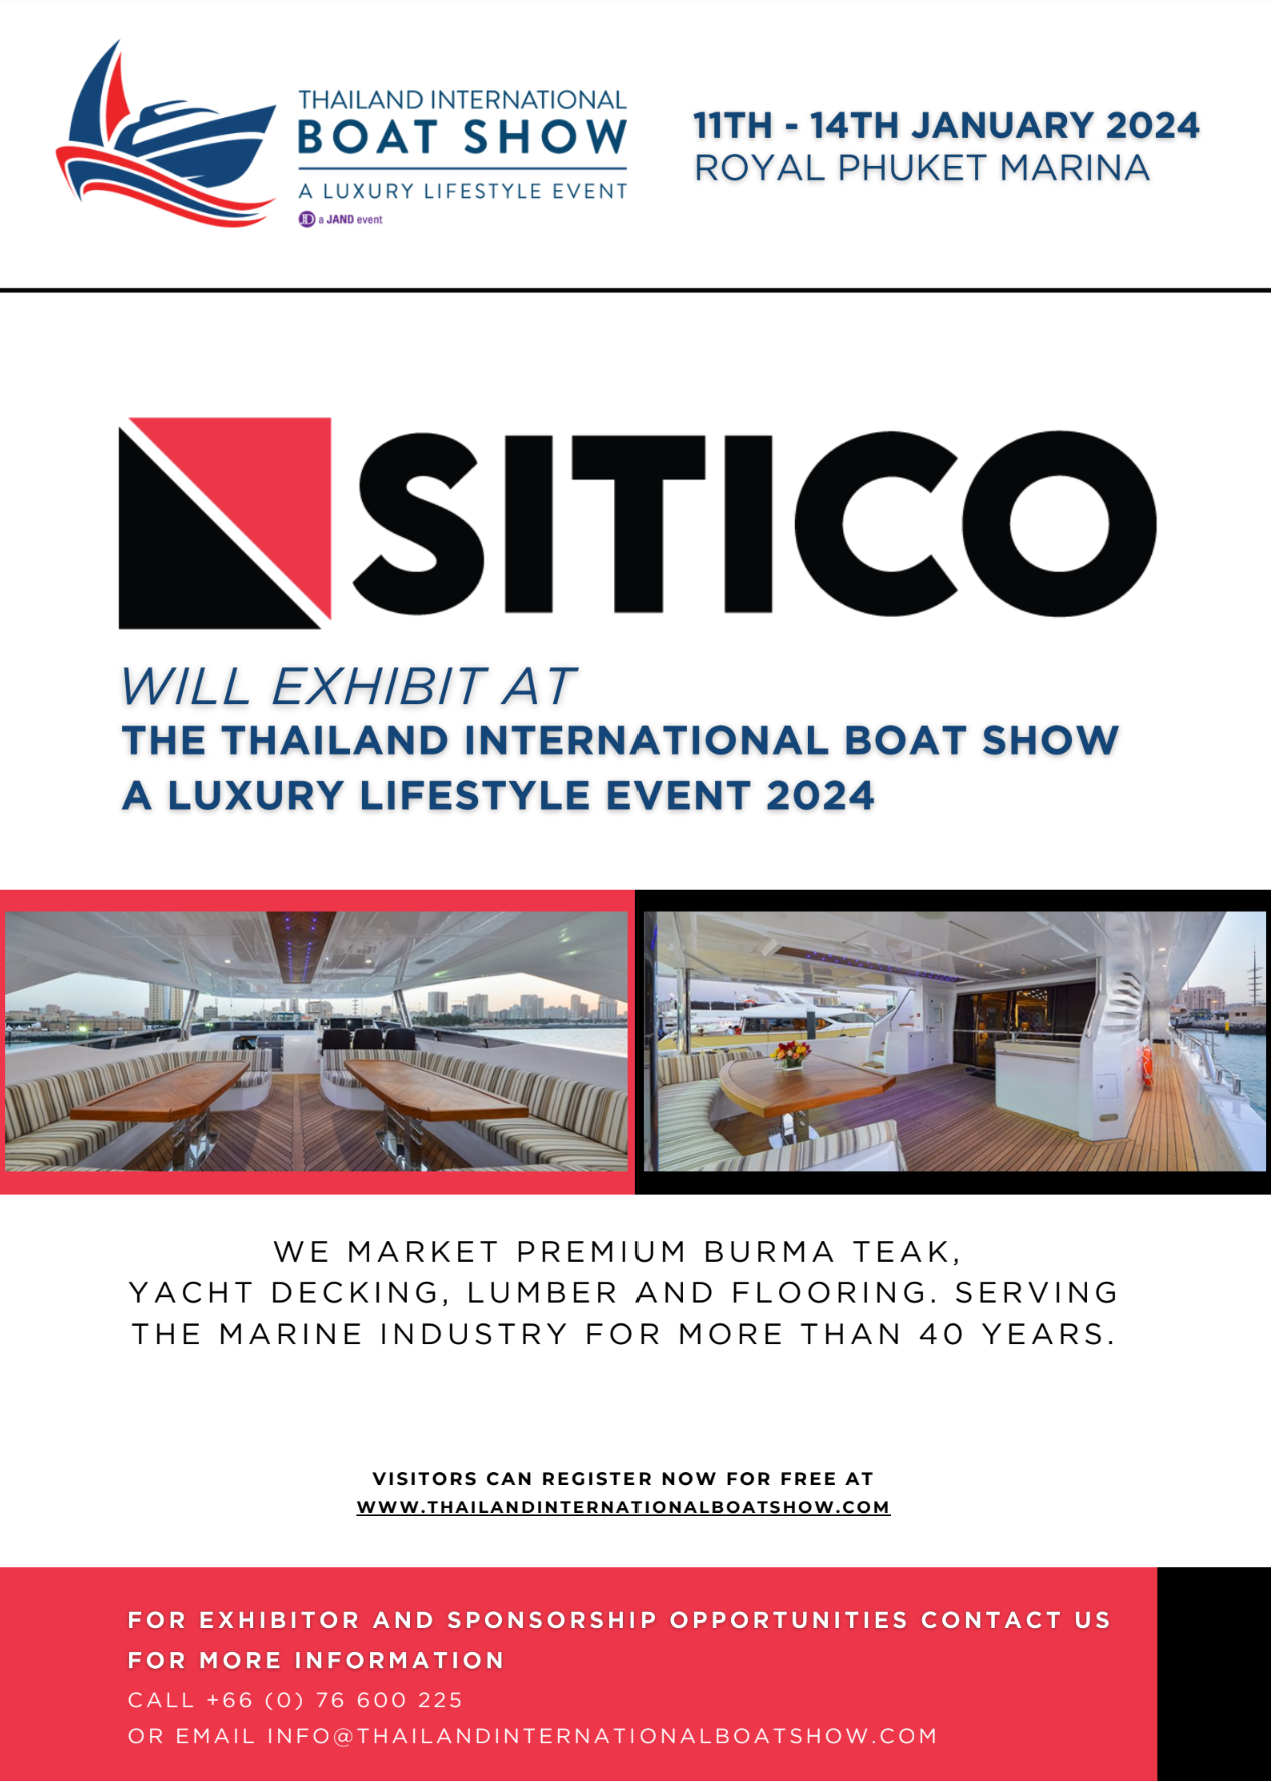 SITICO will Exhibit at The Thailand International Boat Show A Luxury Lifestyle Event 2024